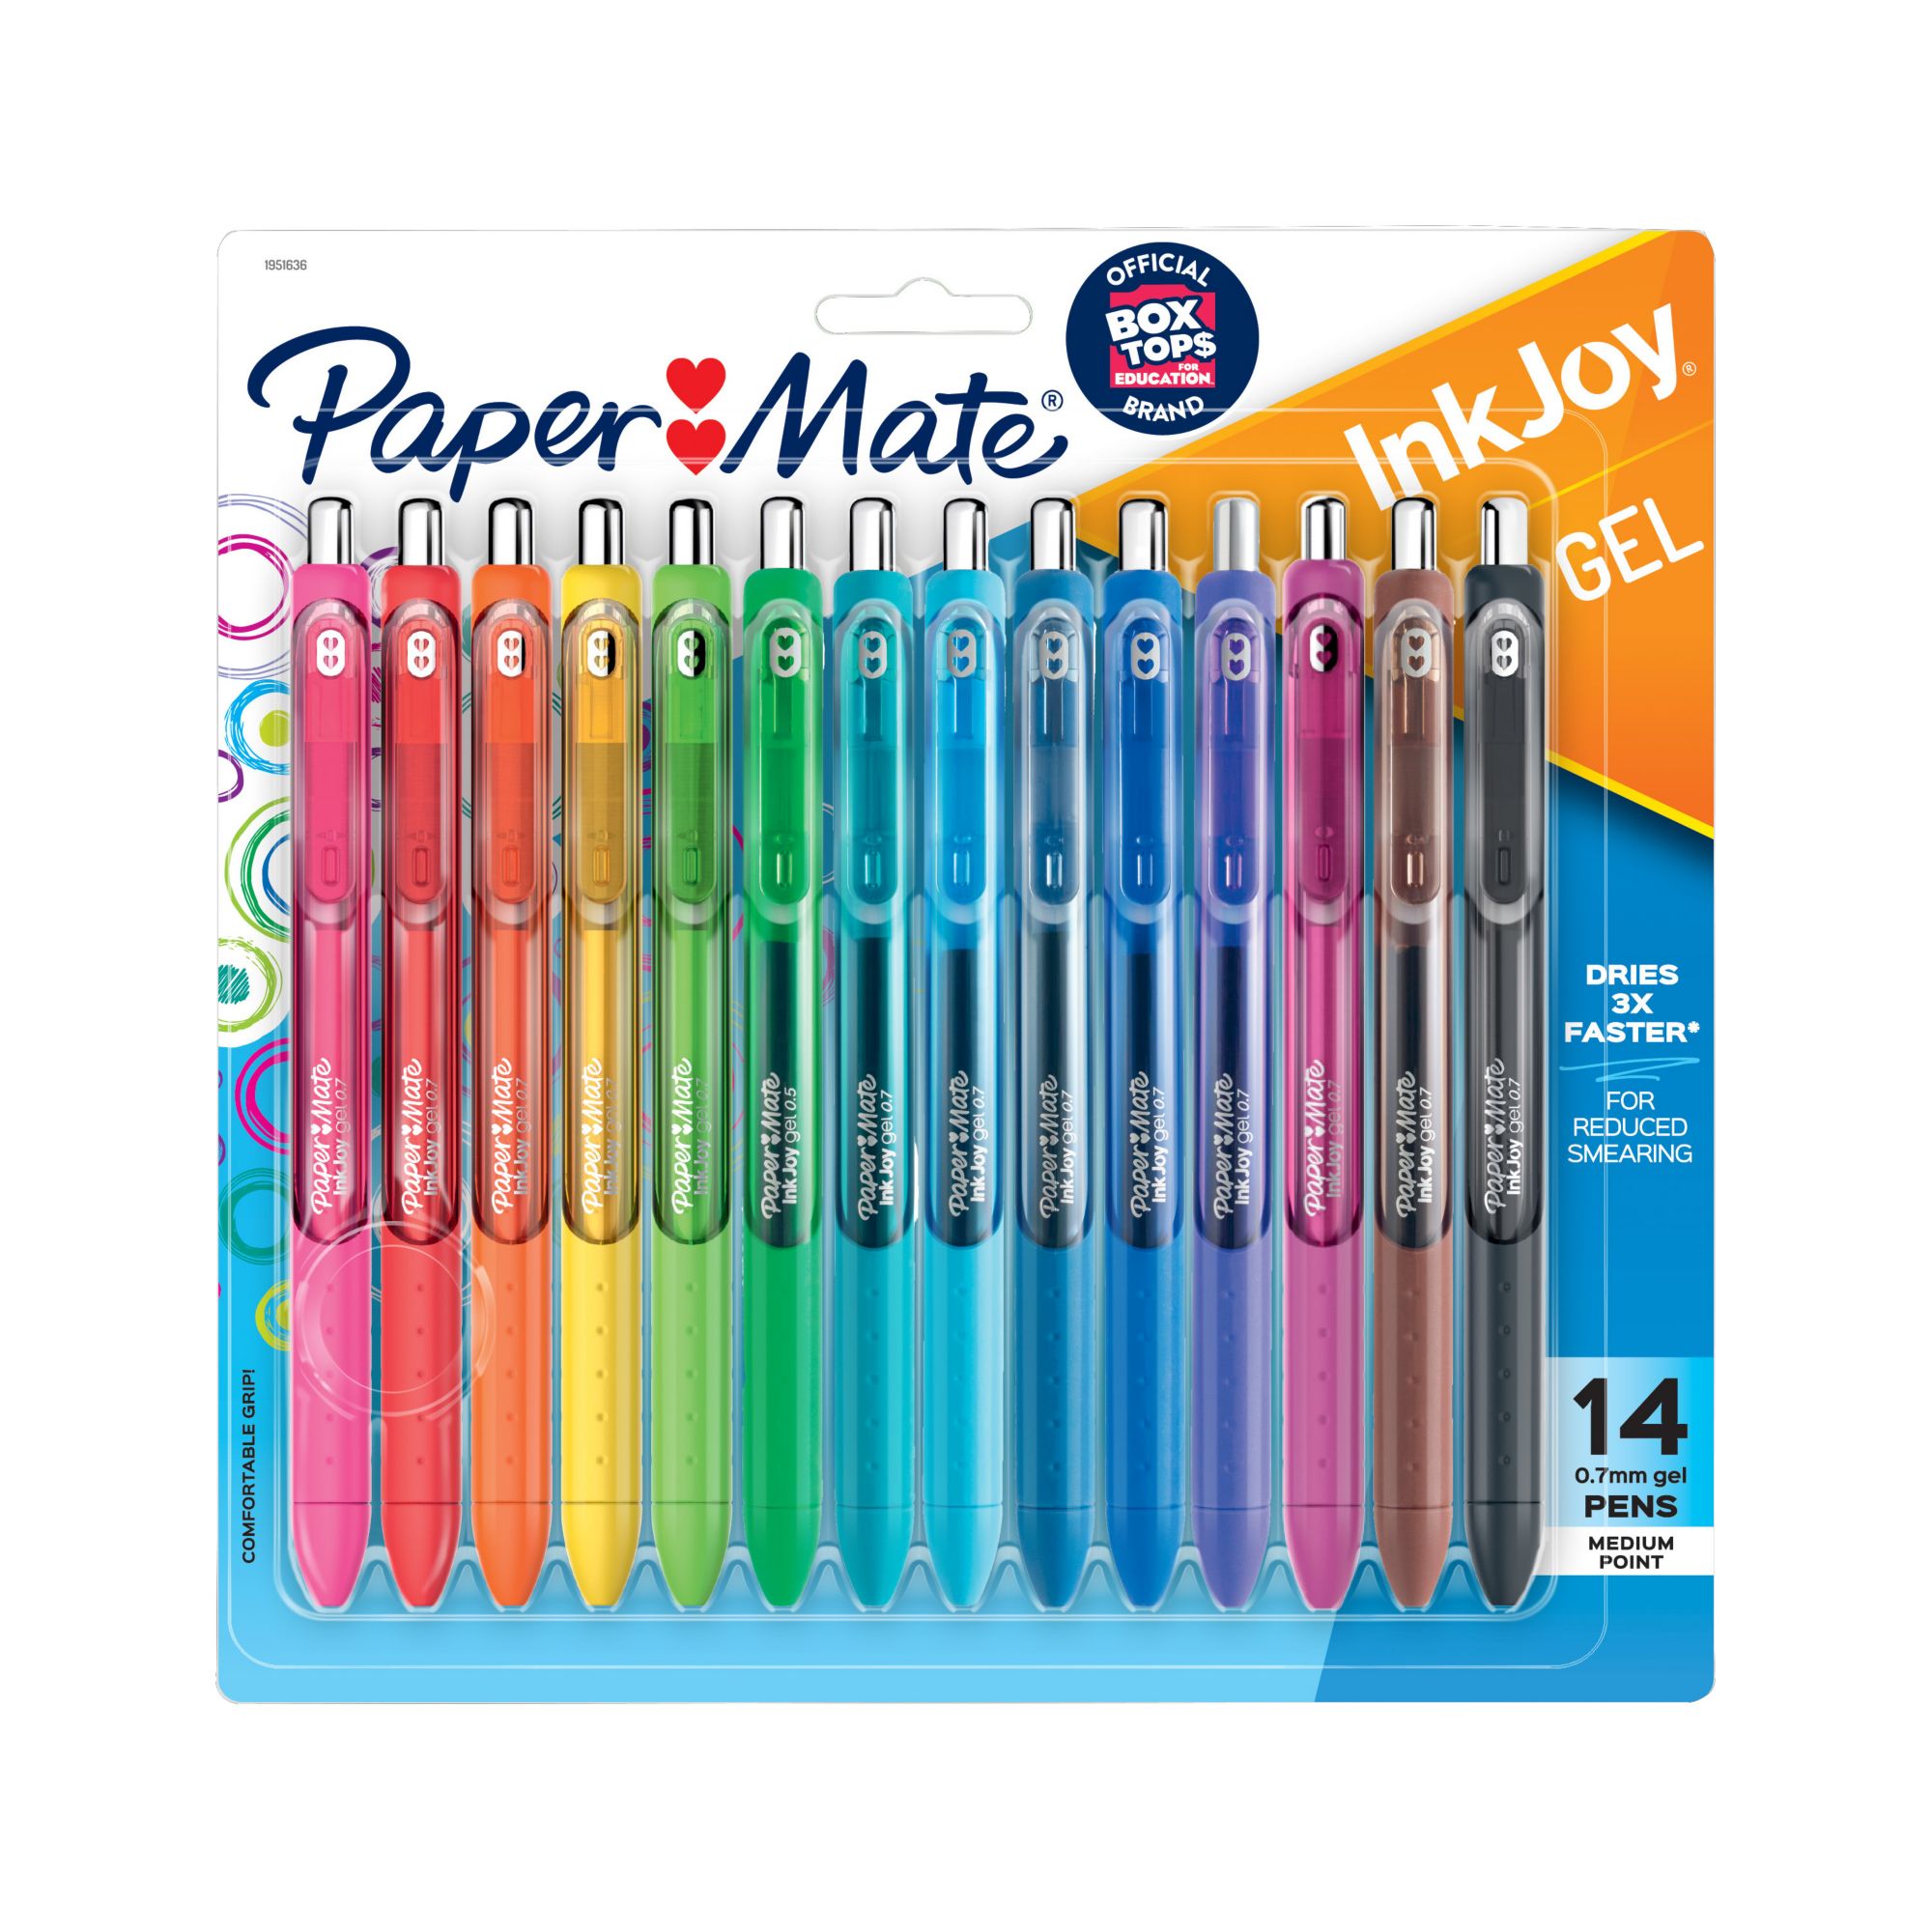 Paper Mate Flair Pen 18 Ct. - Assorted Colors